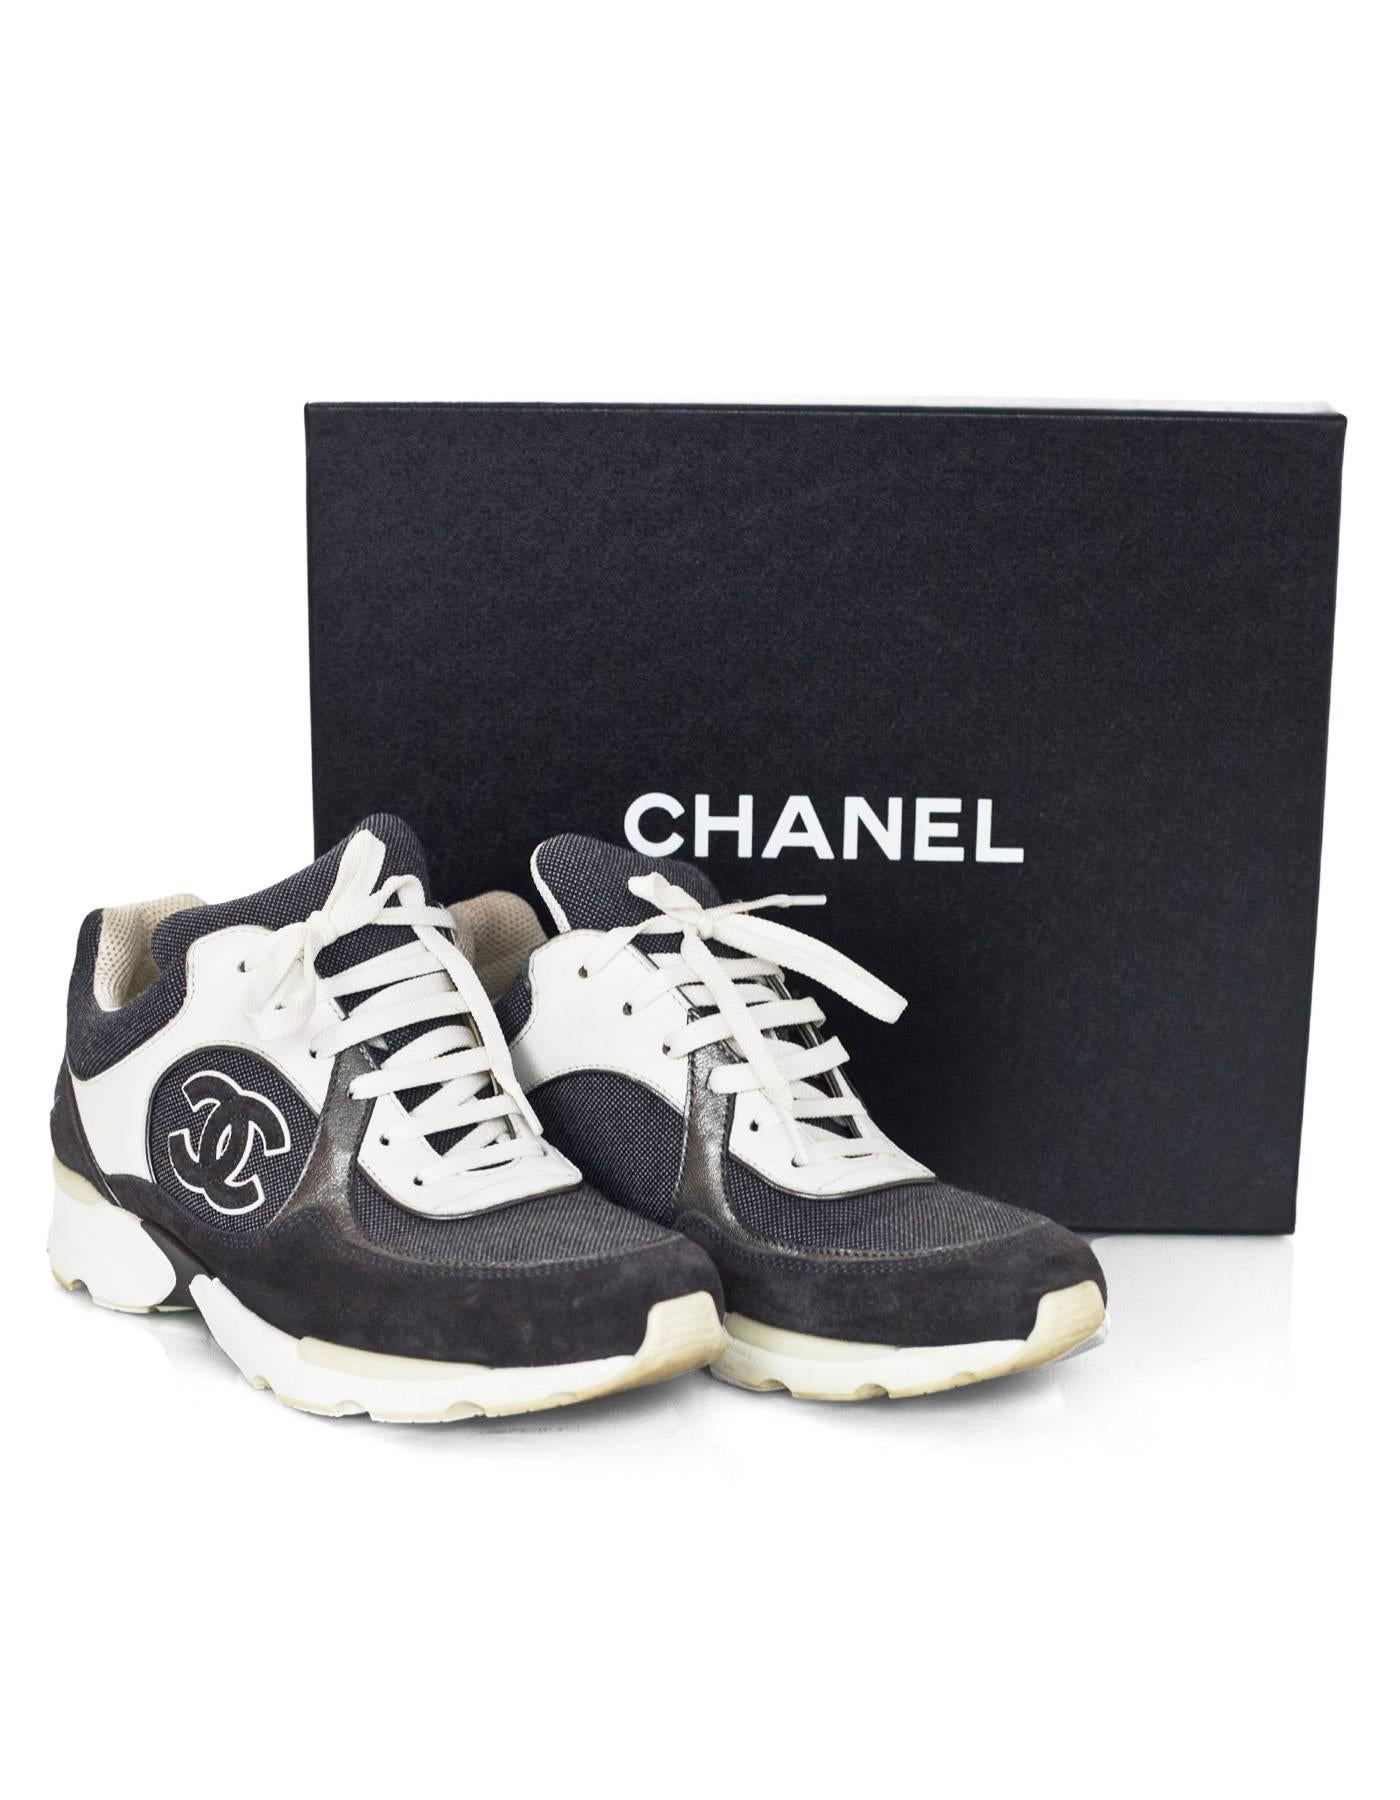 7/11 Chanel White and Grey CC Sneakers Sz 38.5 with Box 1